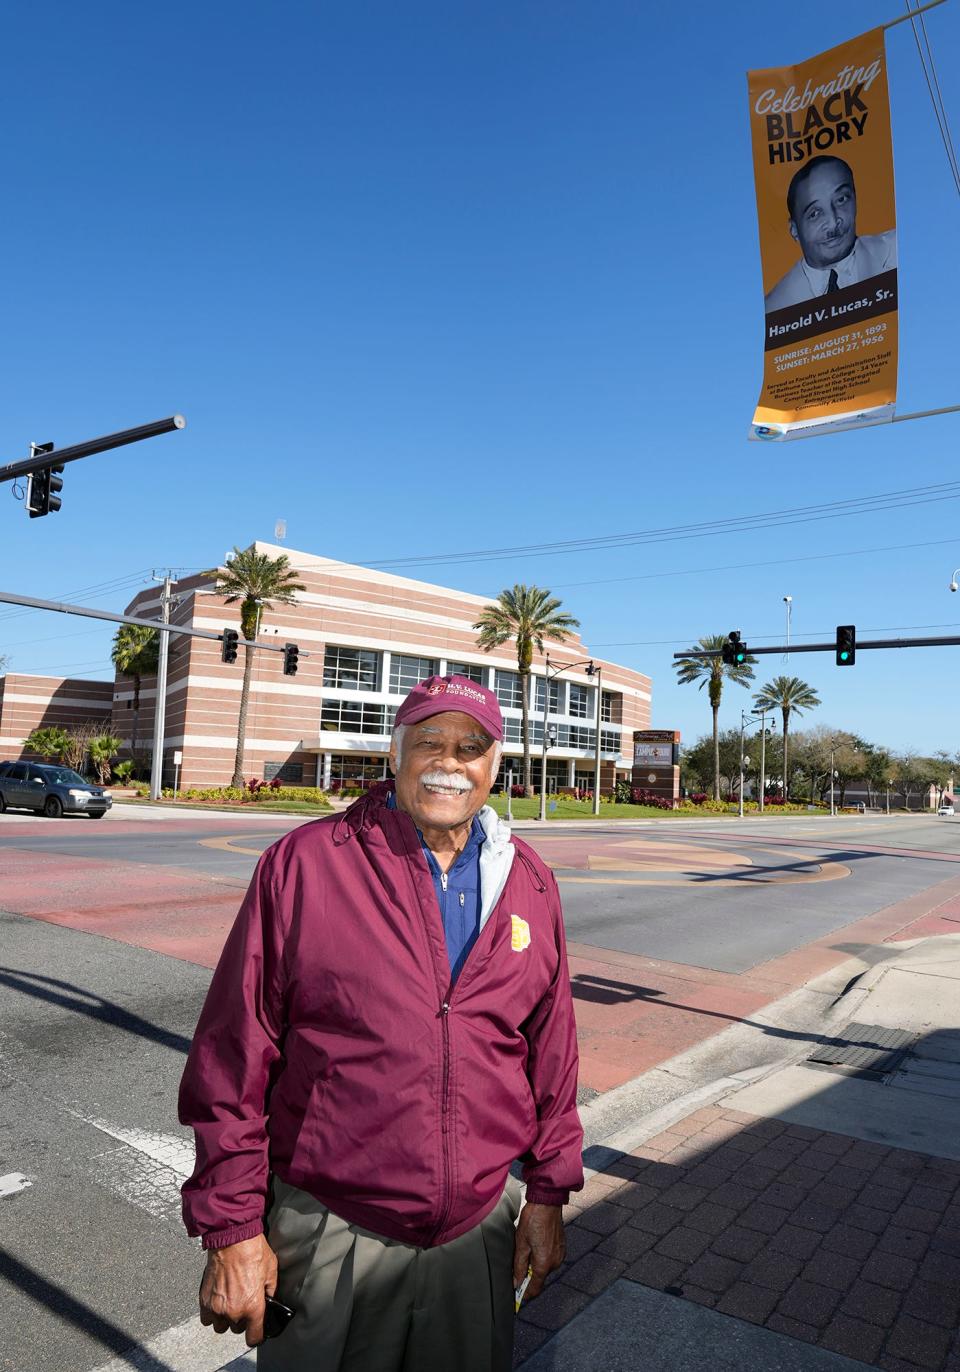 For four years now, Daytona Beach has honored local Black leaders who made an impact on the community with banners displayed along International Speedway Boulevard throughout February, Black History Month. Harold Lucas, Jr., is proud to have his father, Harold Lucas, Sr., depicted on one of the banners.